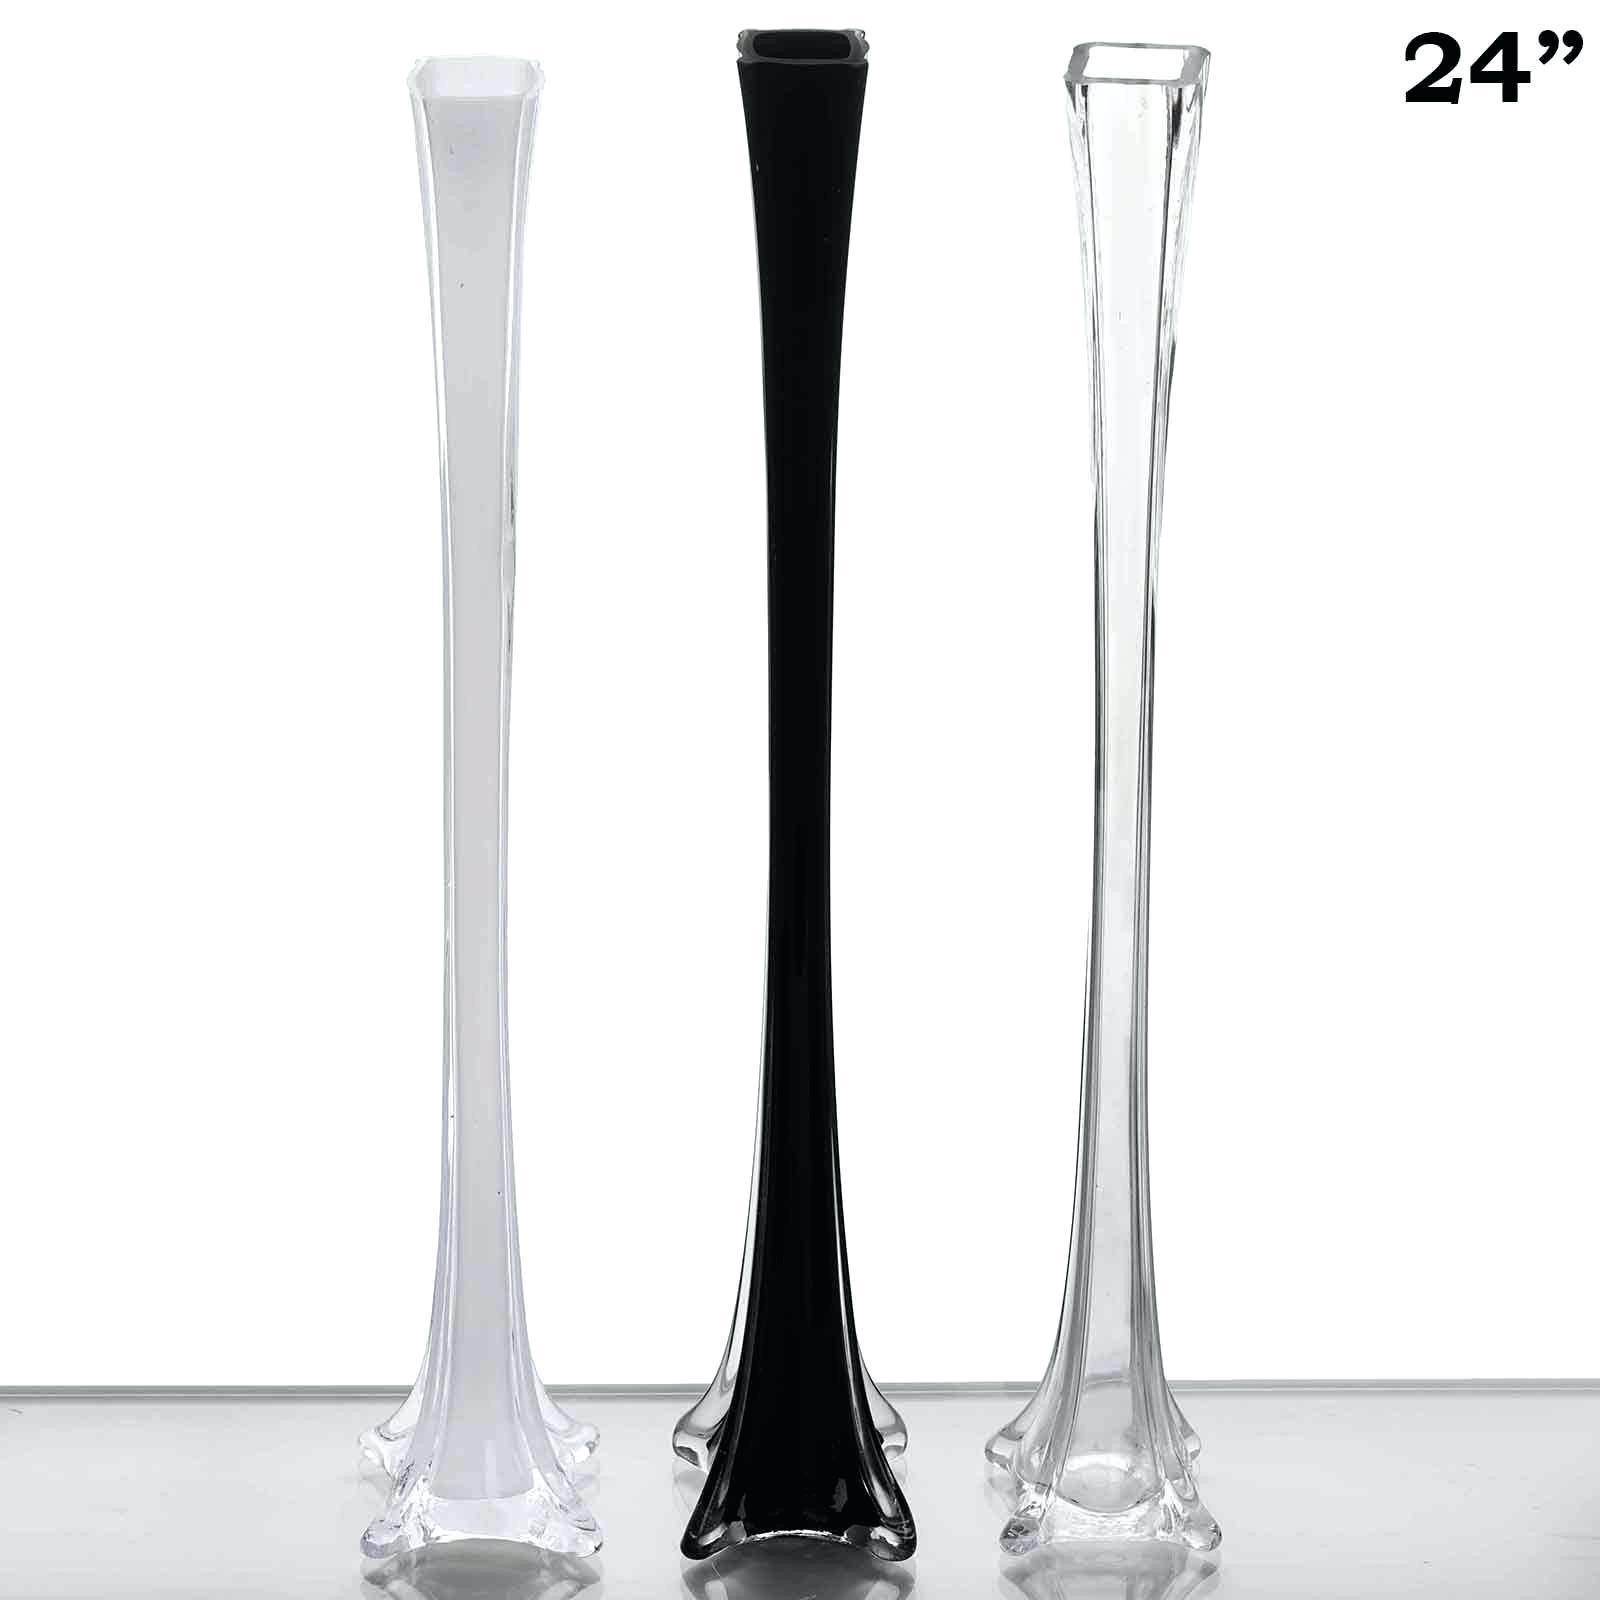 29 Nice Glass Vases Near Me 2024 free download glass vases near me of fantastic chair decor ideas from living room vases wholesale awesome with regard to fantastic chair decor ideas from living room vases wholesale awesome cheap glass va